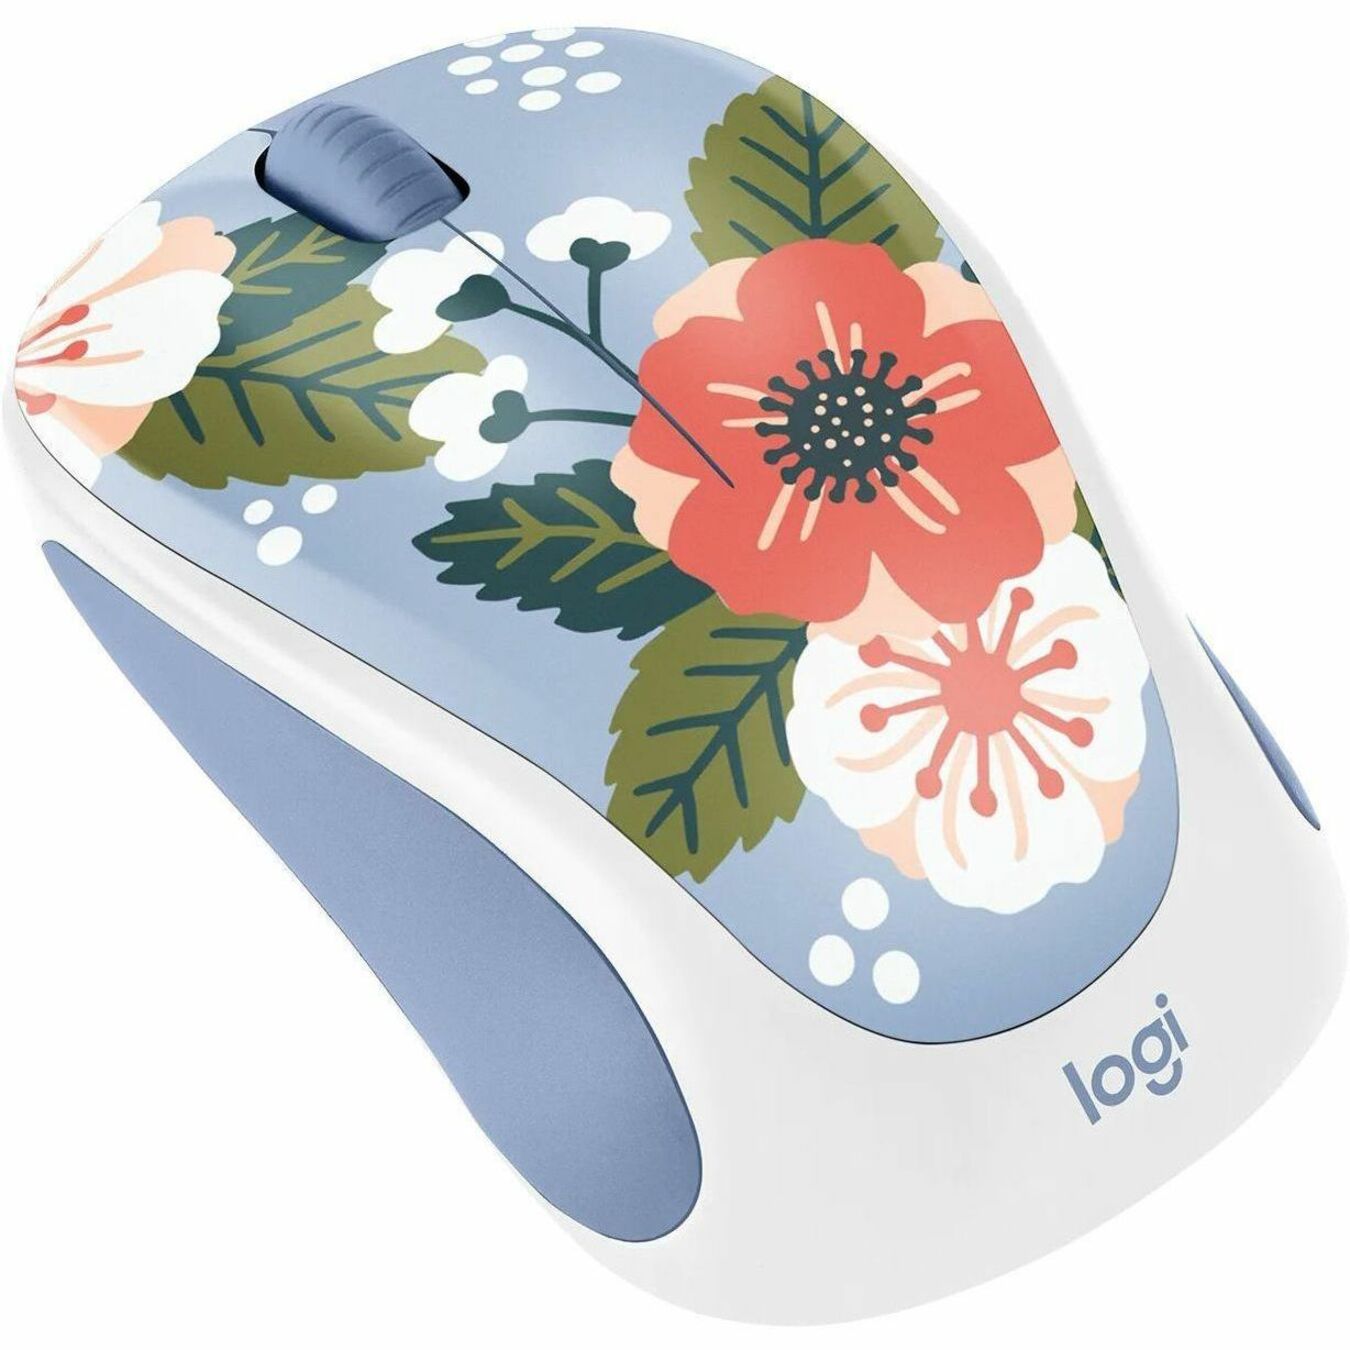 Logitech 910-007056 Design Collection Limited Edition Wireless Mouse, Small Size, Summer Breeze Pattern